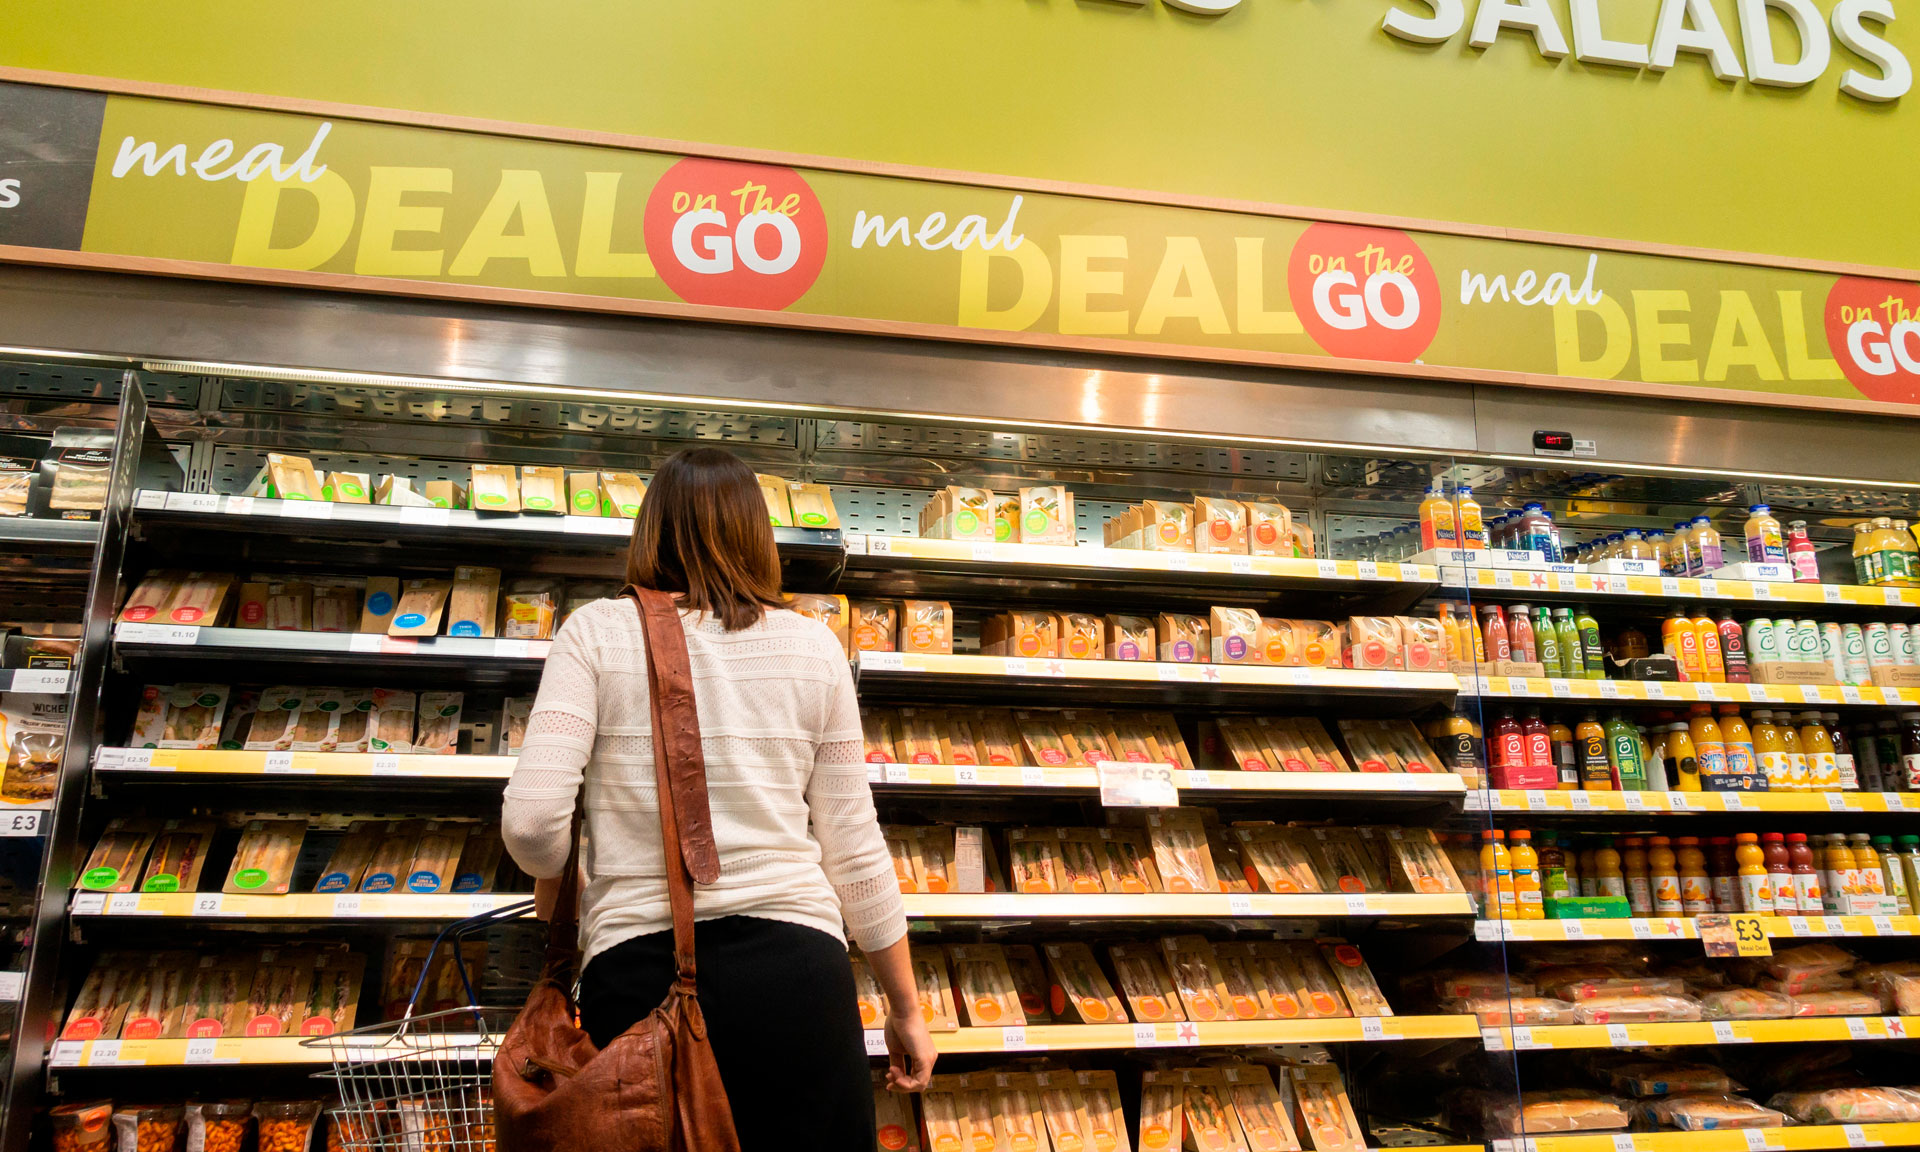 Which shops offer the best value for money on lunchtime meal deals?